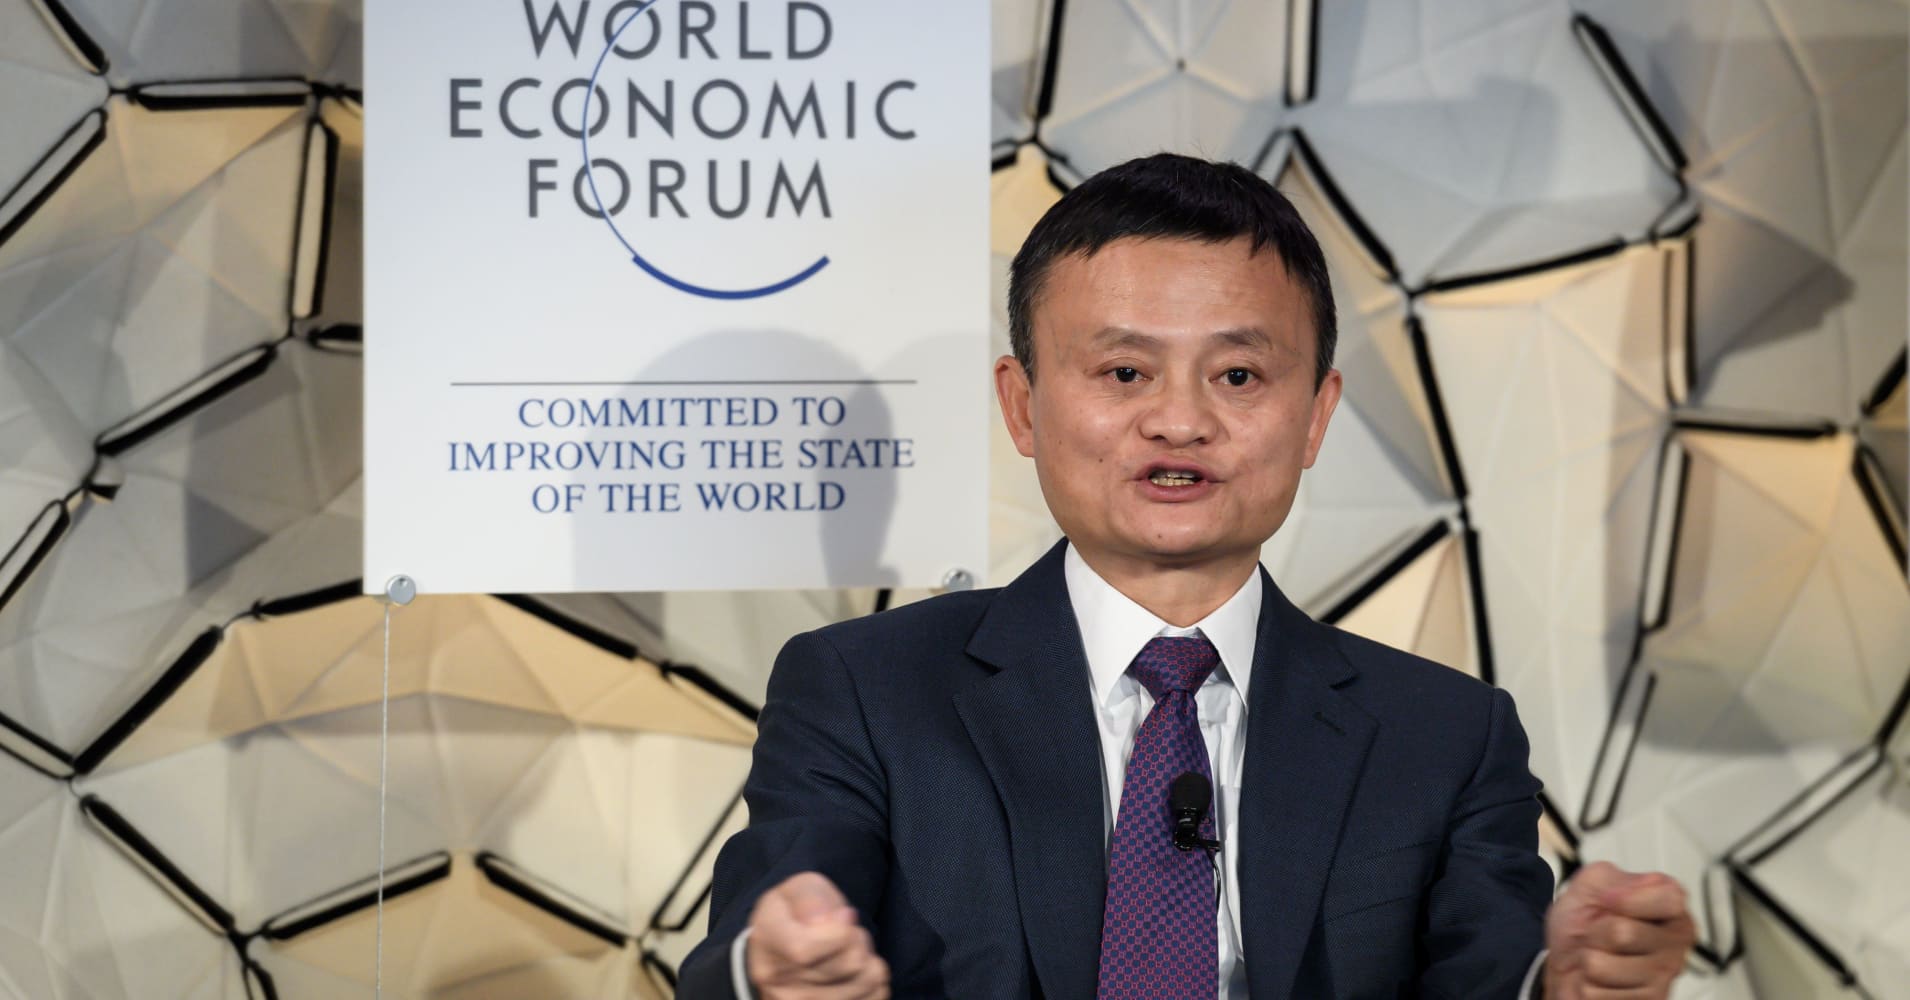 Alibaba Group co-founder and executive chairman Jack Ma during a panel session at the World Economic Forum (WEF) annual meeting, on January 23, 2019 in Davos, eastern Switzerland.